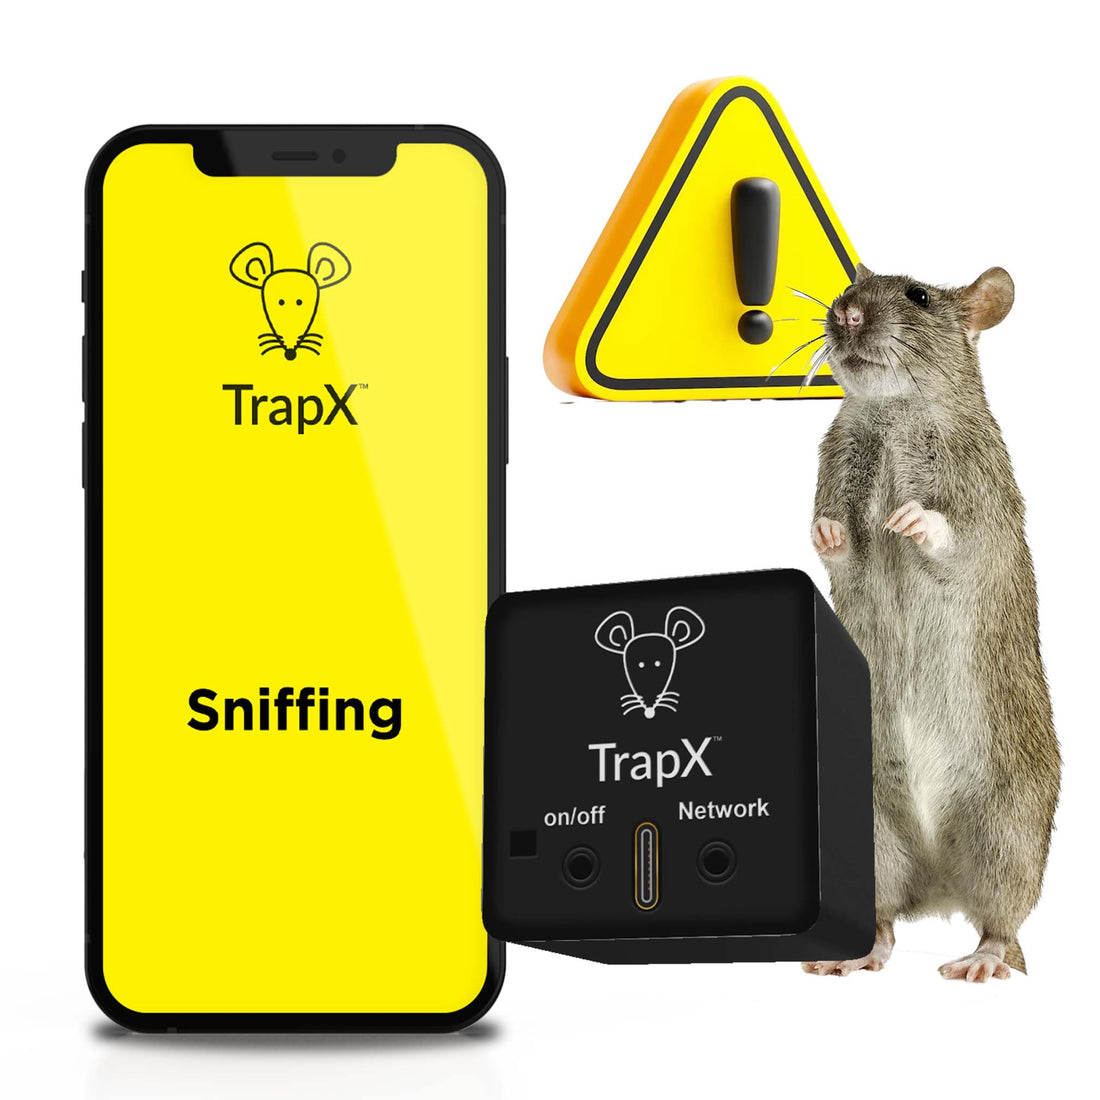 What are the benefits of using sticky mouse traps indoors?